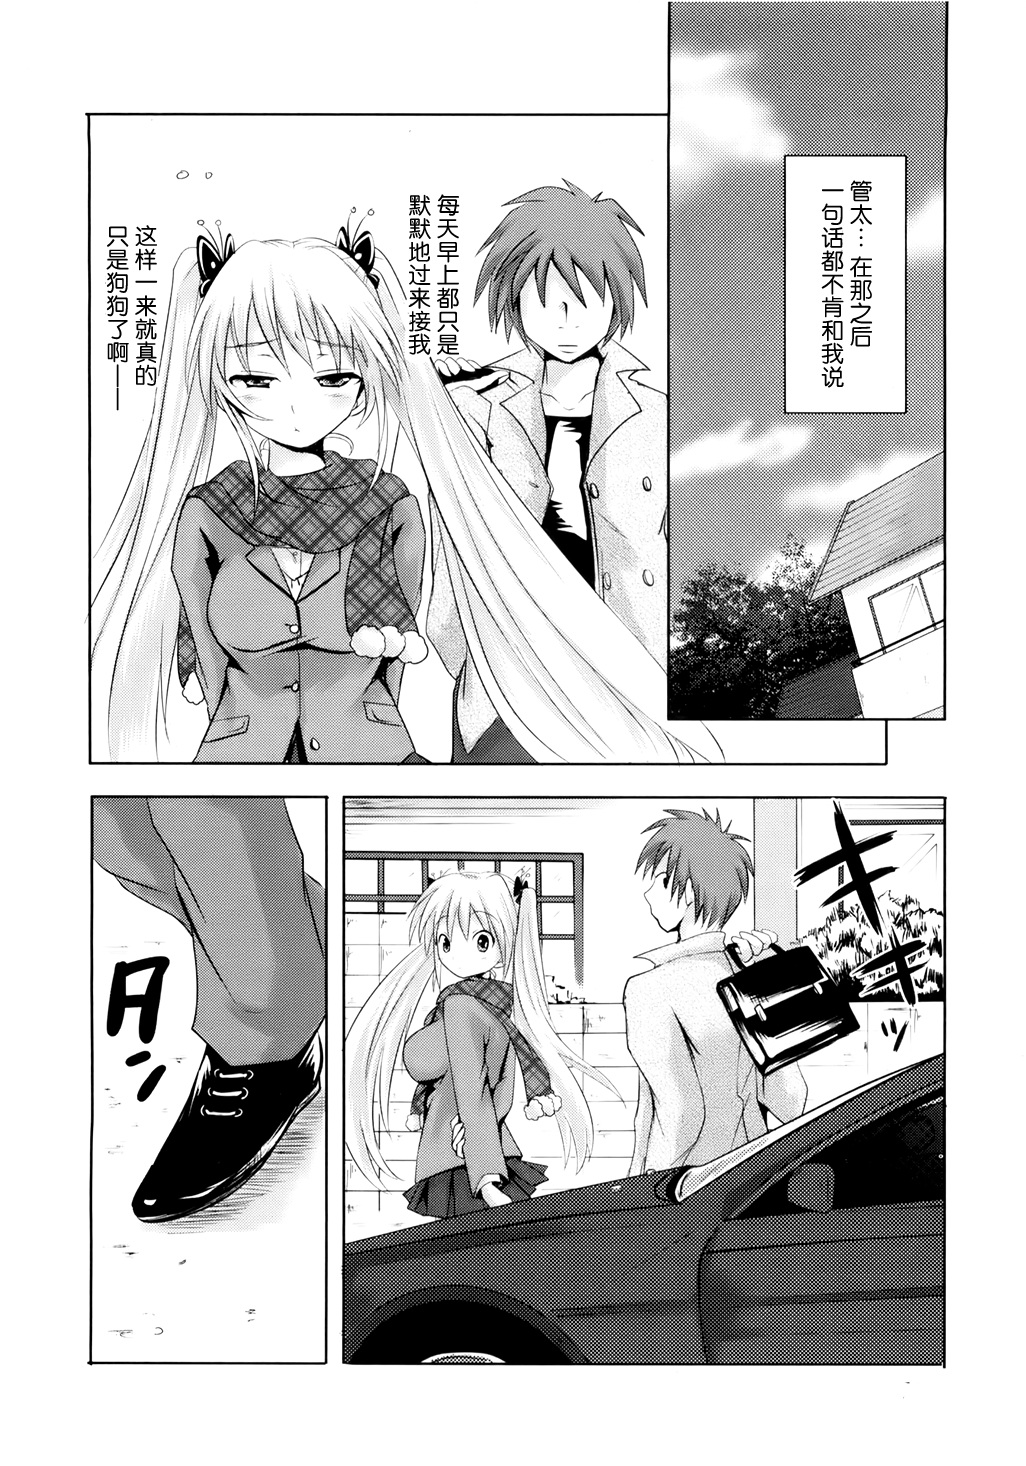 [Natsume Fumika] Sundere! Ch.9 [Chinese] [夏目文花] スンデレ! CH9 [中文翻譯]